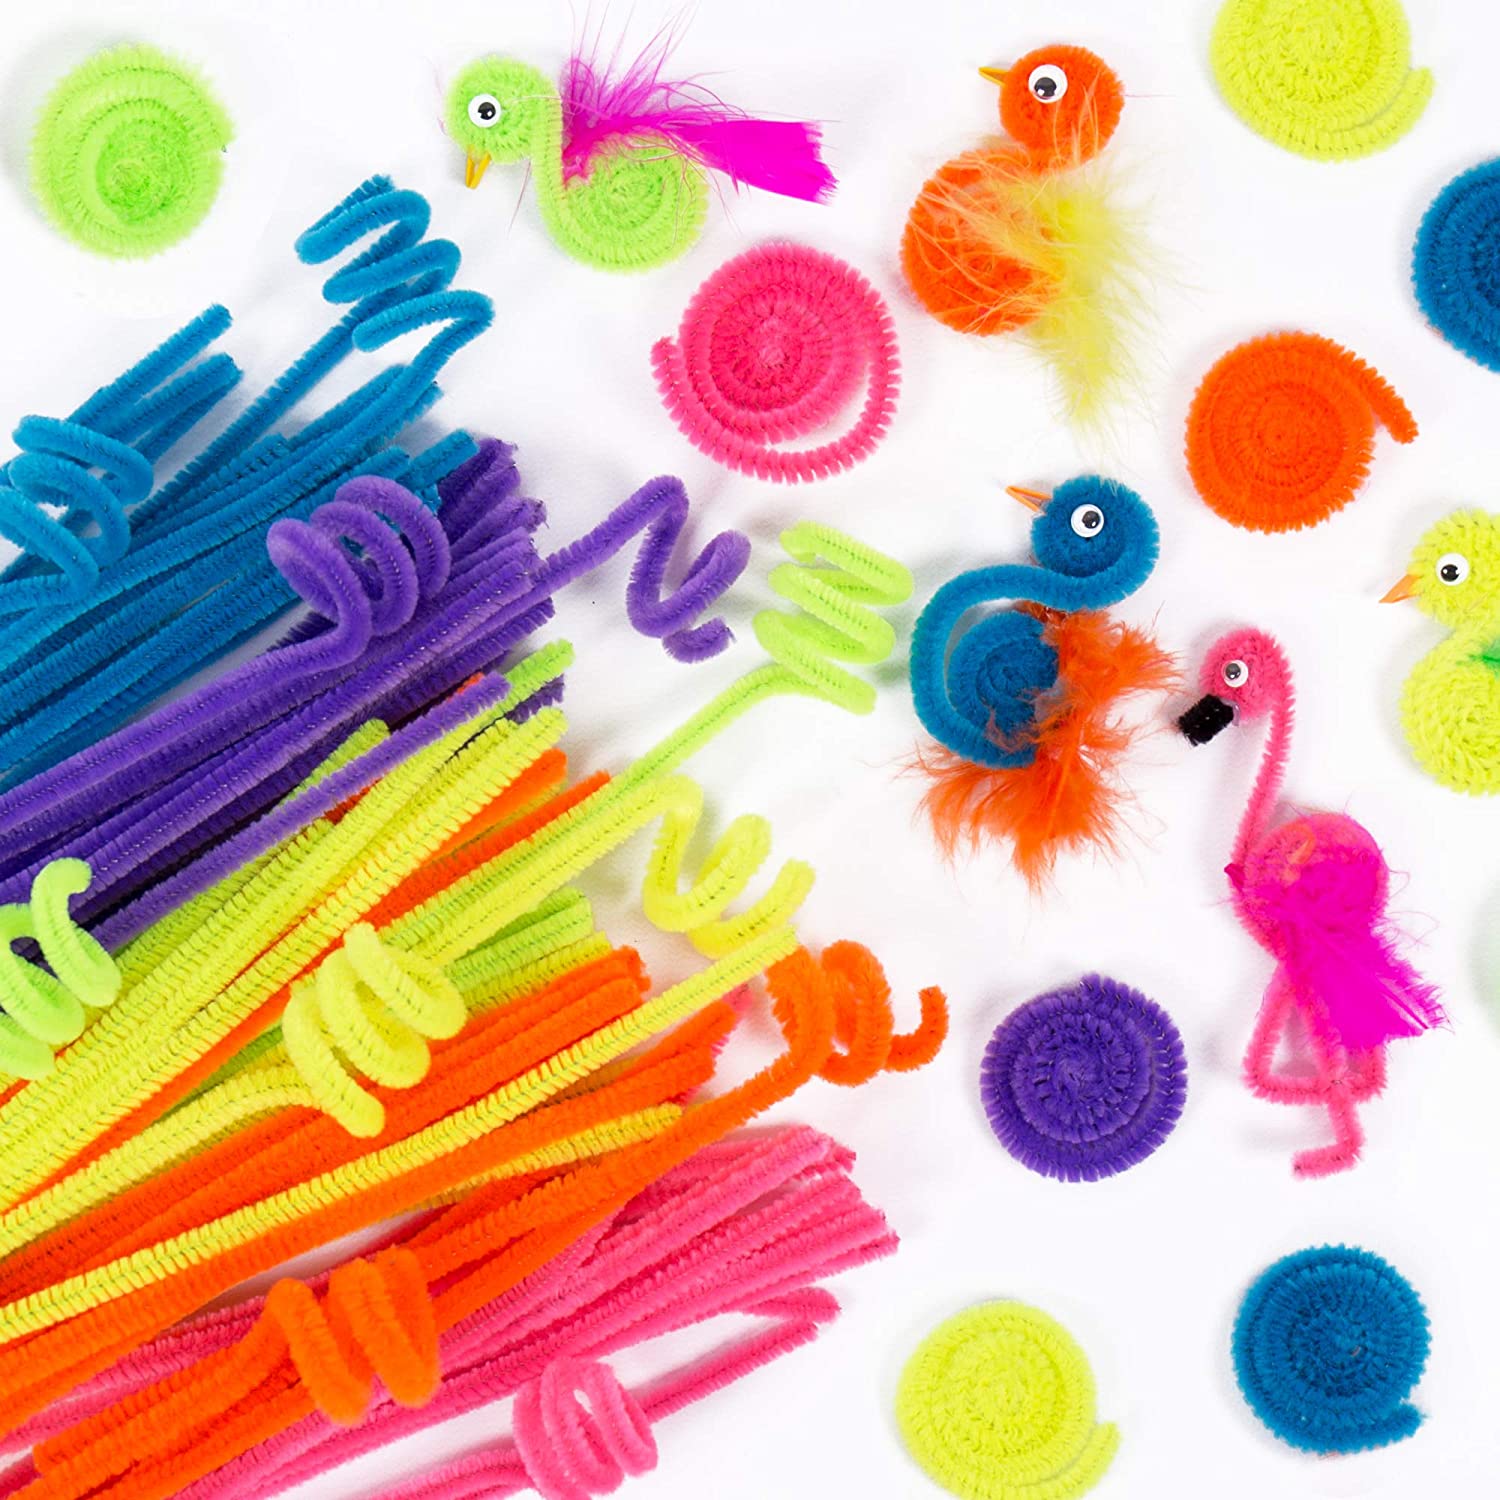 Colorful pipe cleaner crafts